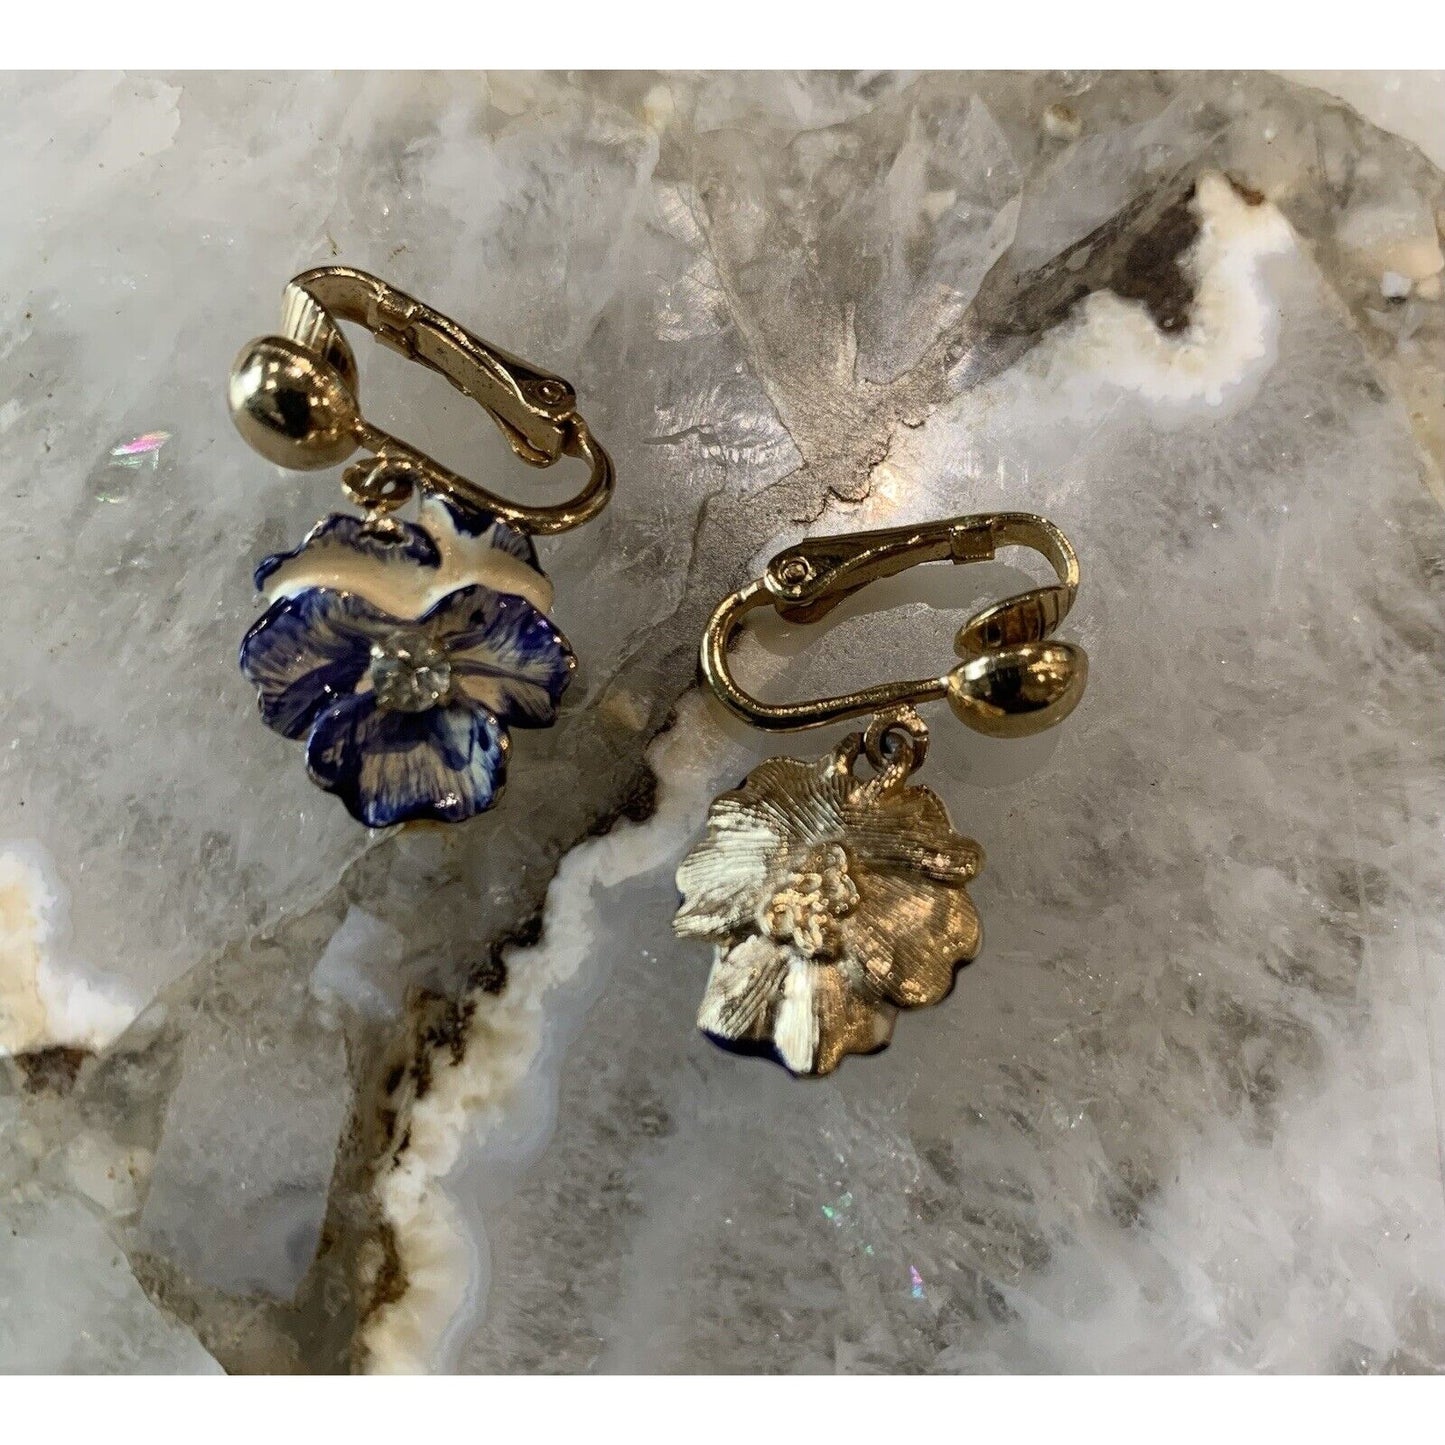 Blue And White With Gold-Tone Floral Earrings